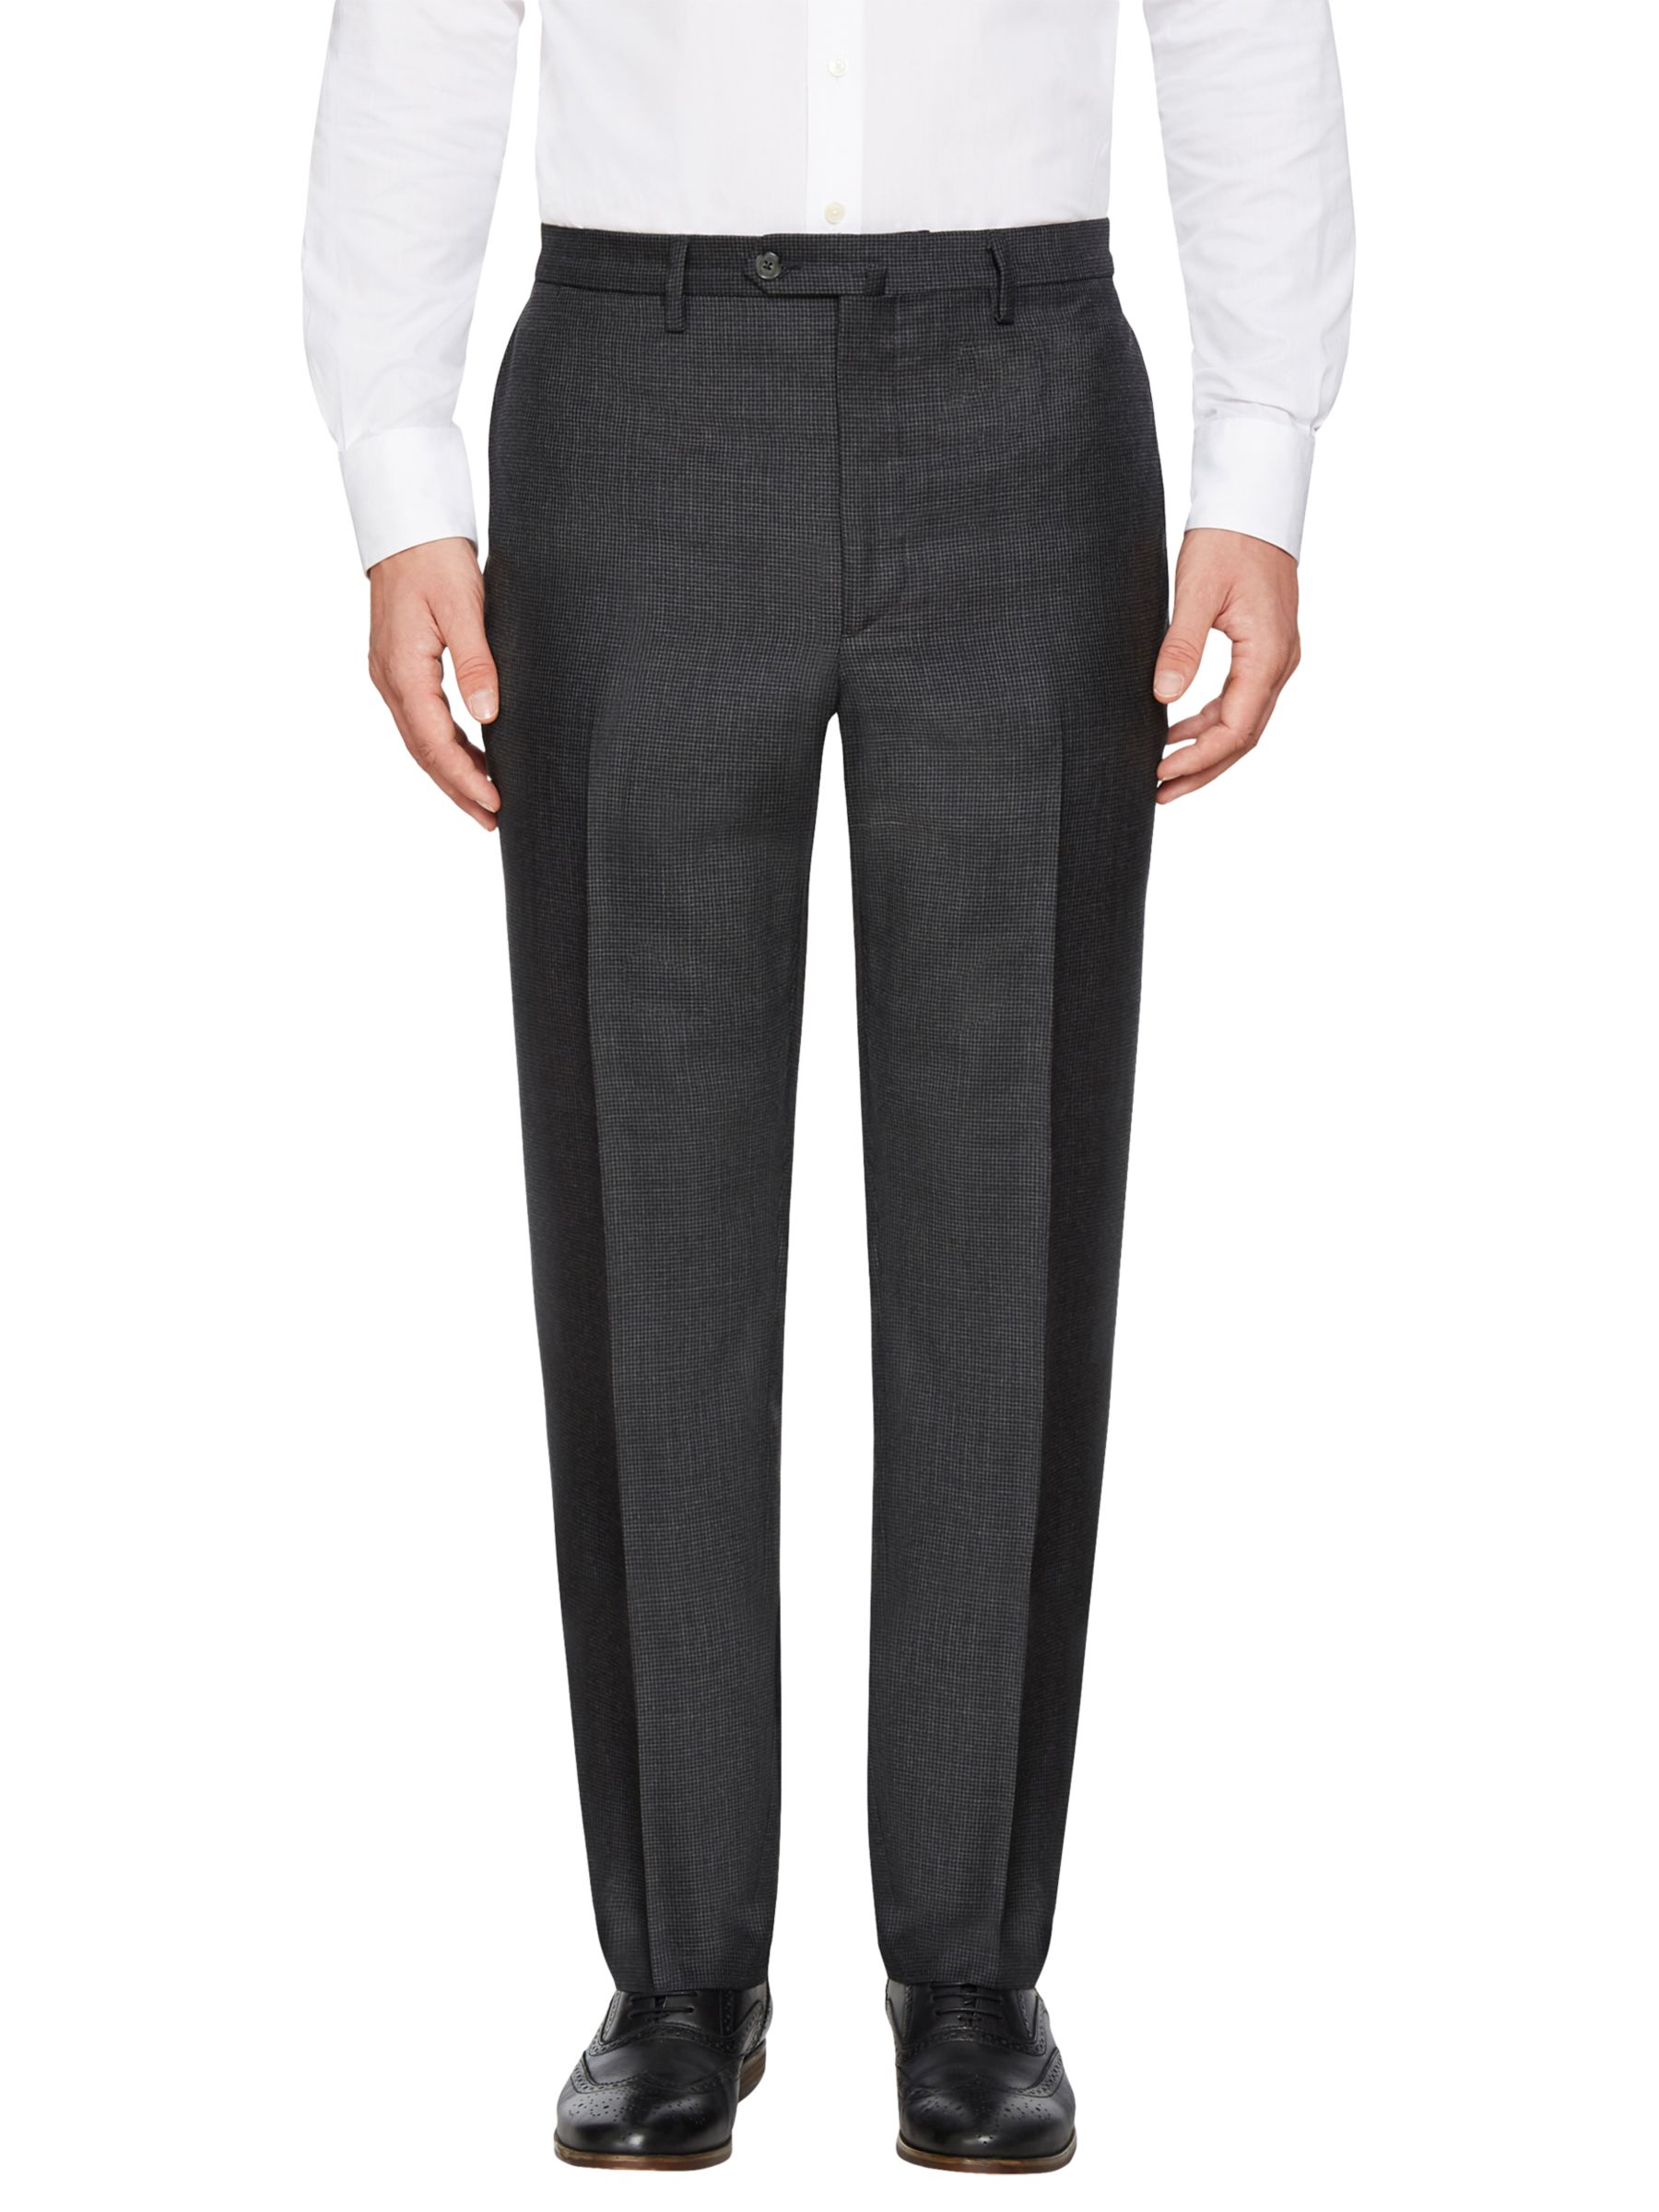 Hackett London Wool Puppytooth Regular Fit Suit Trousers, Charcoal, 38R